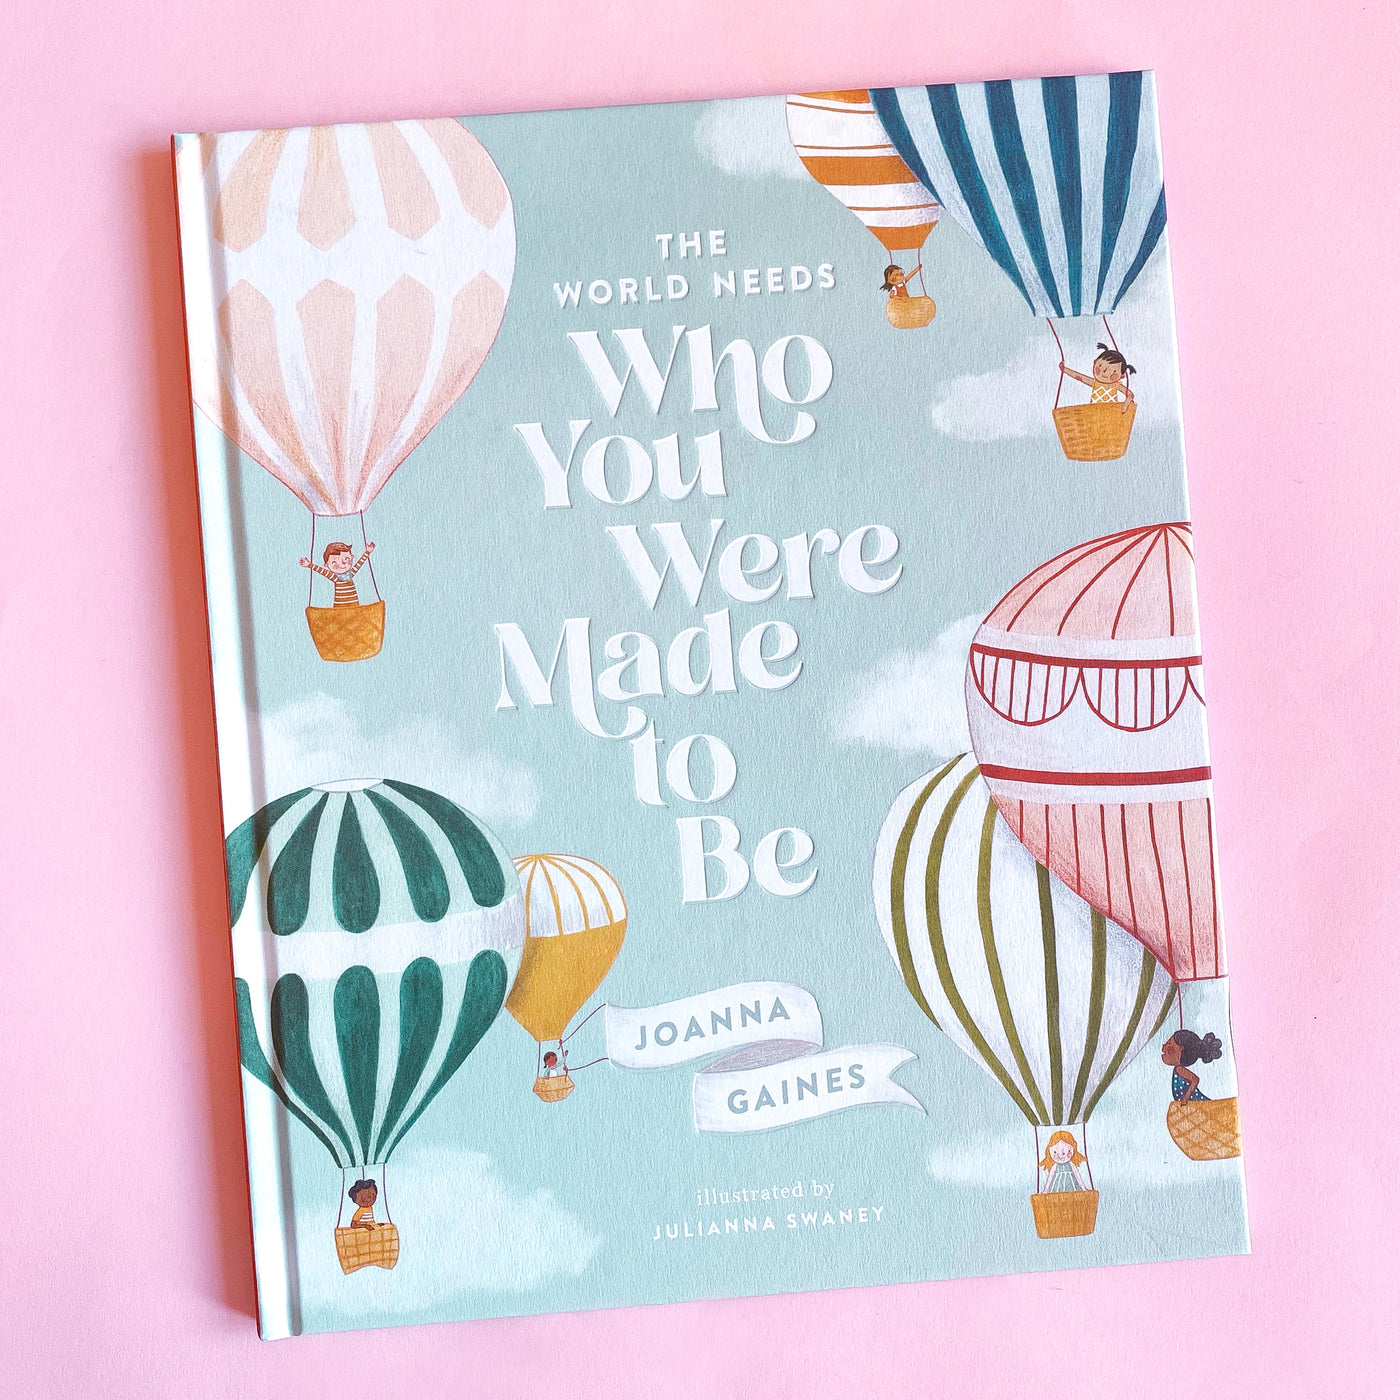 The World Needs Who You Were Made to Be by Joanna Gaines and Julianna Swaney